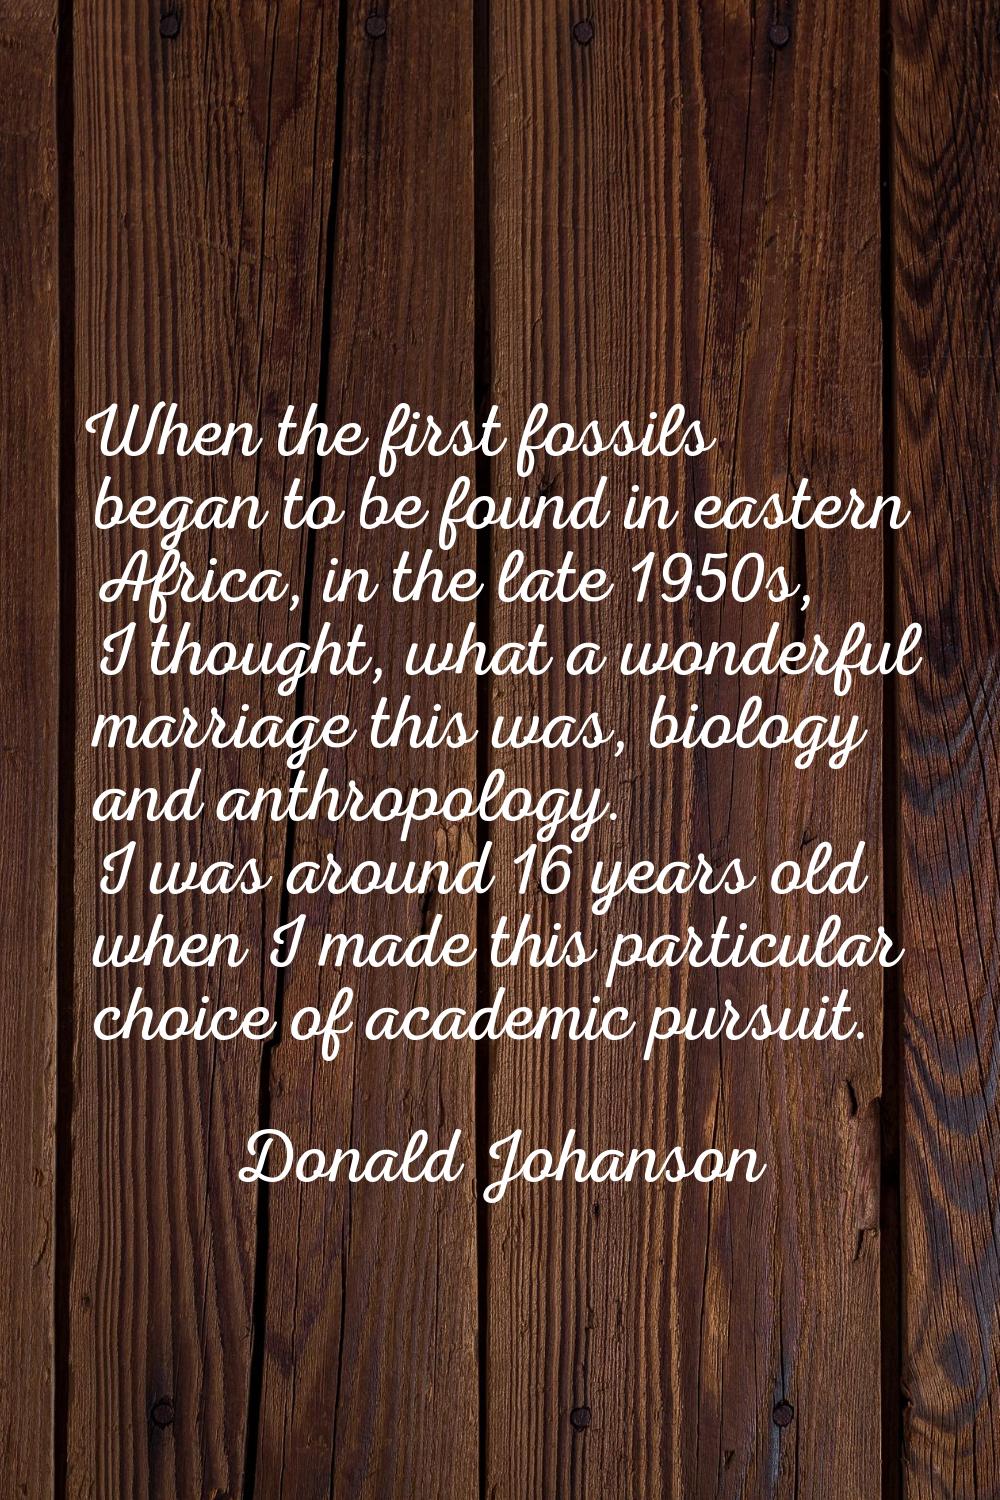 When the first fossils began to be found in eastern Africa, in the late 1950s, I thought, what a wo